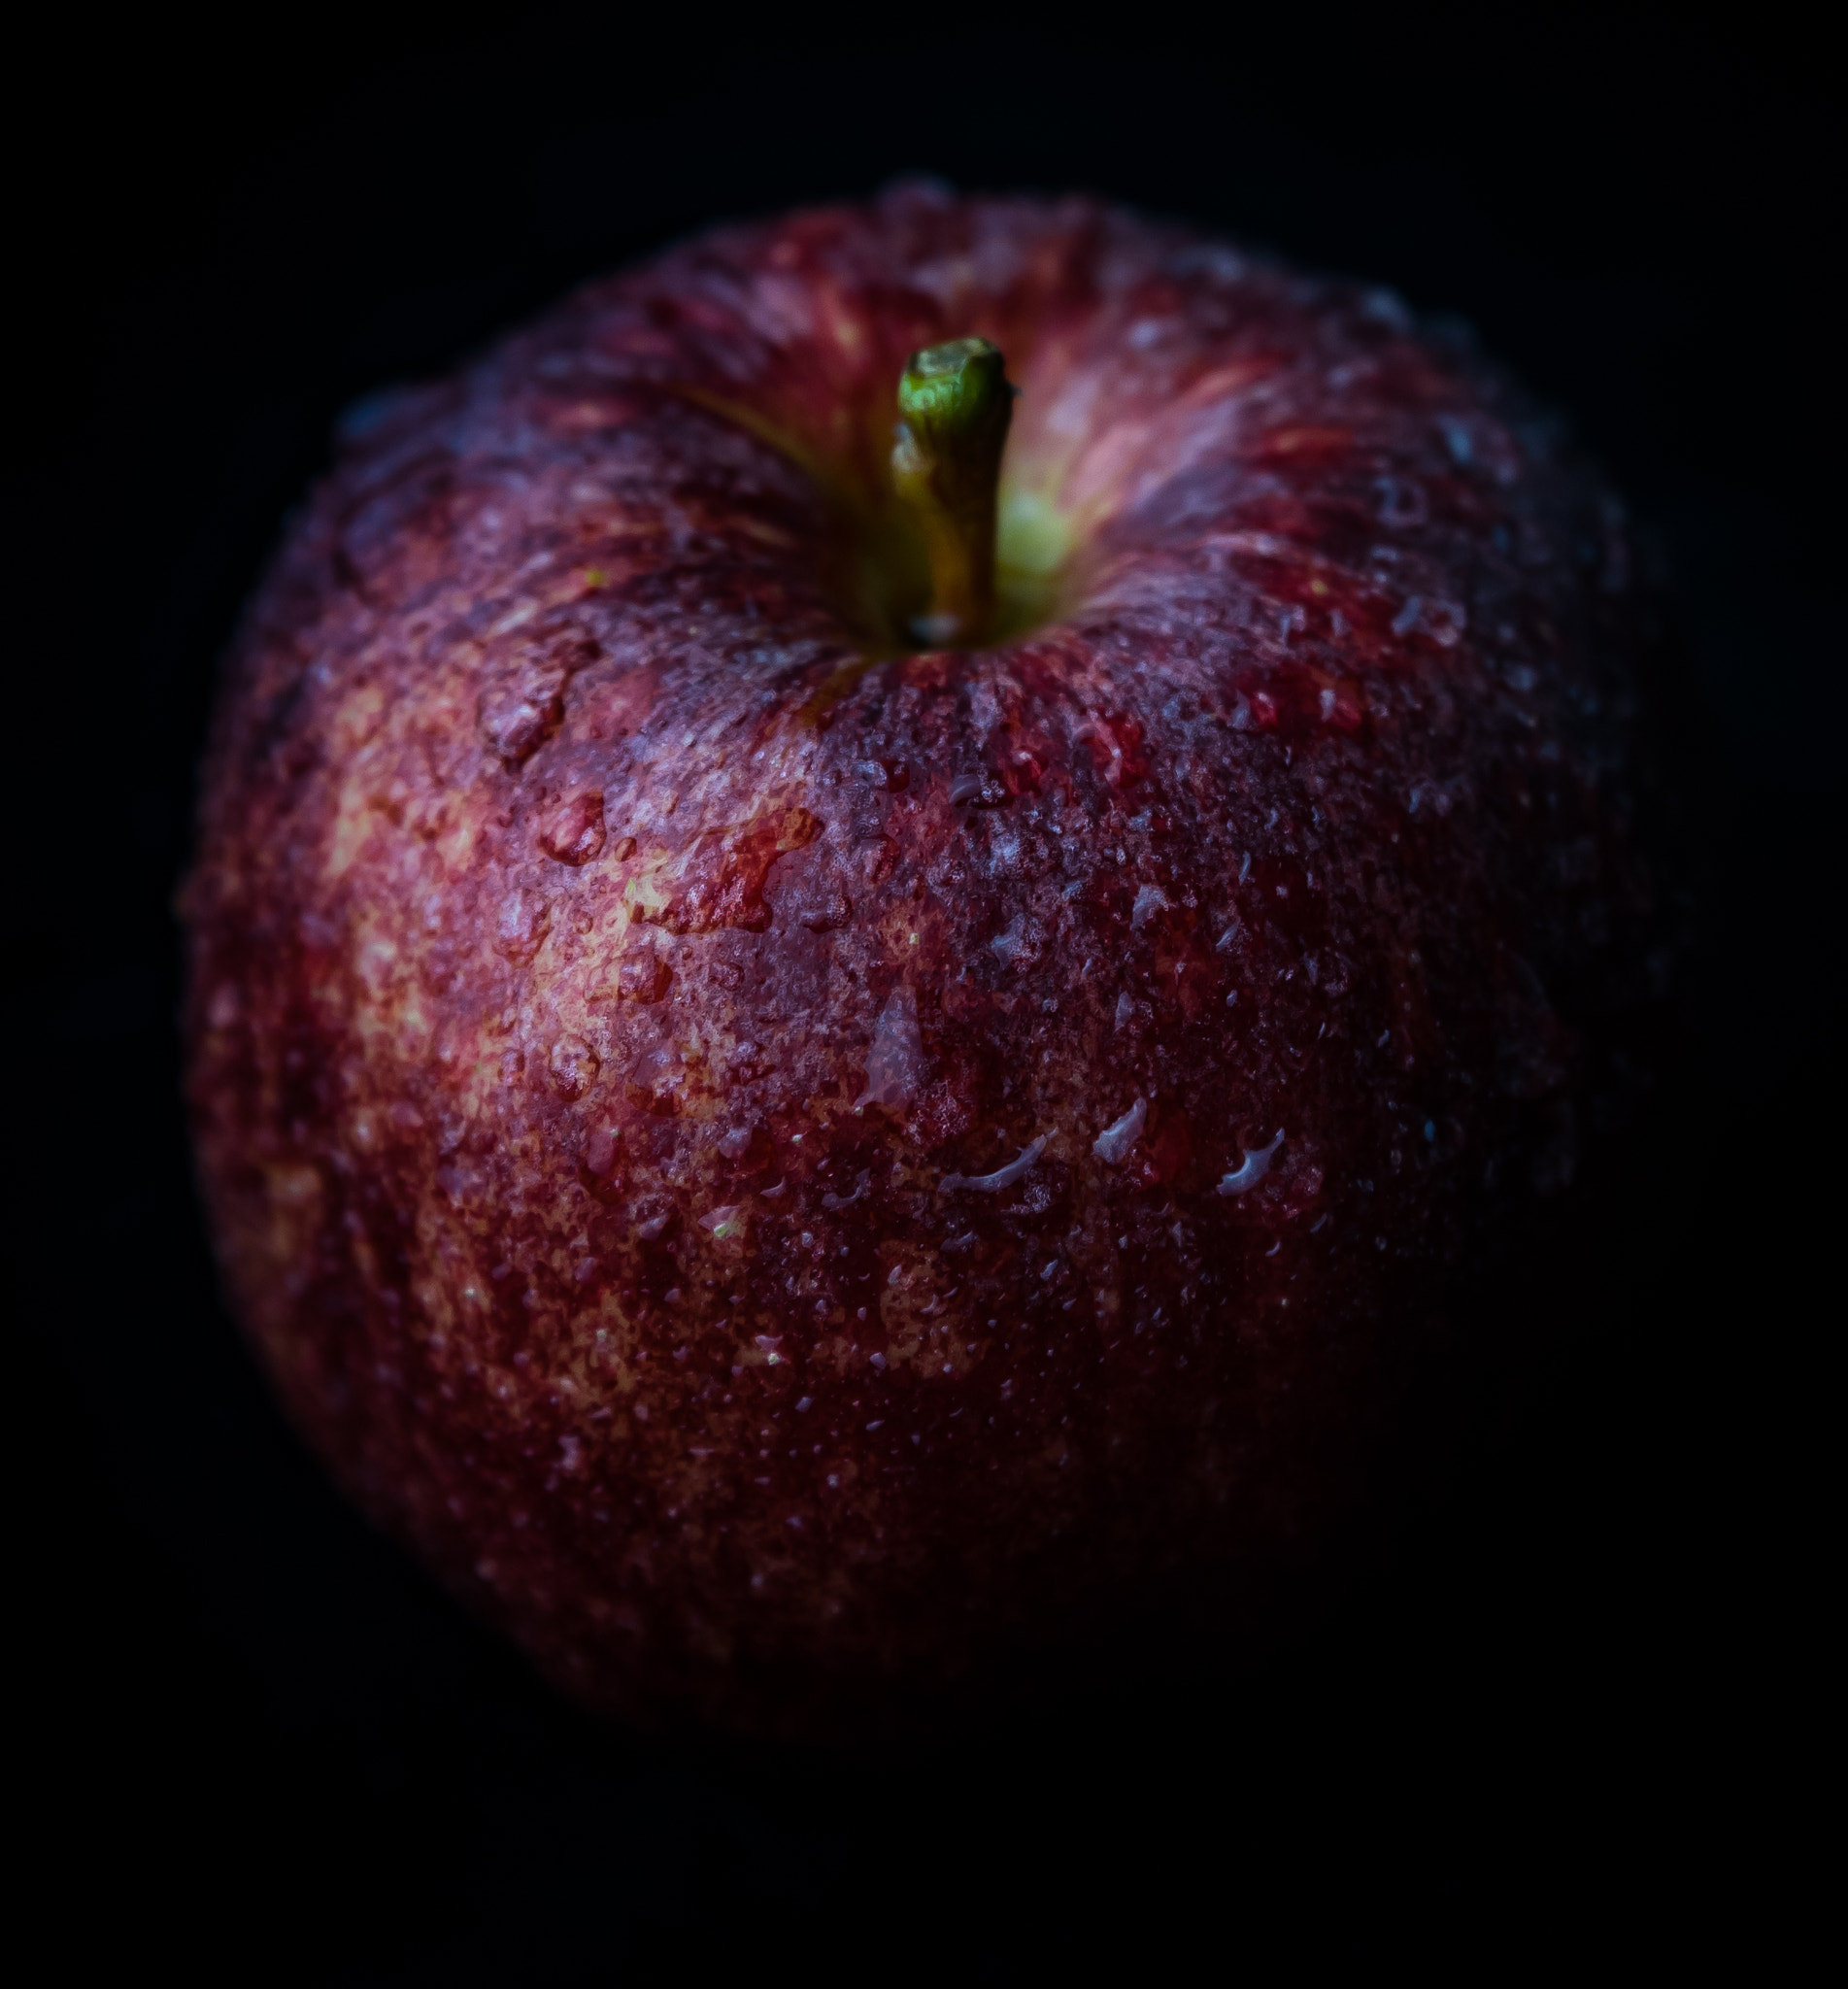 Nikon D750 sample photo. Red apple against black background photography